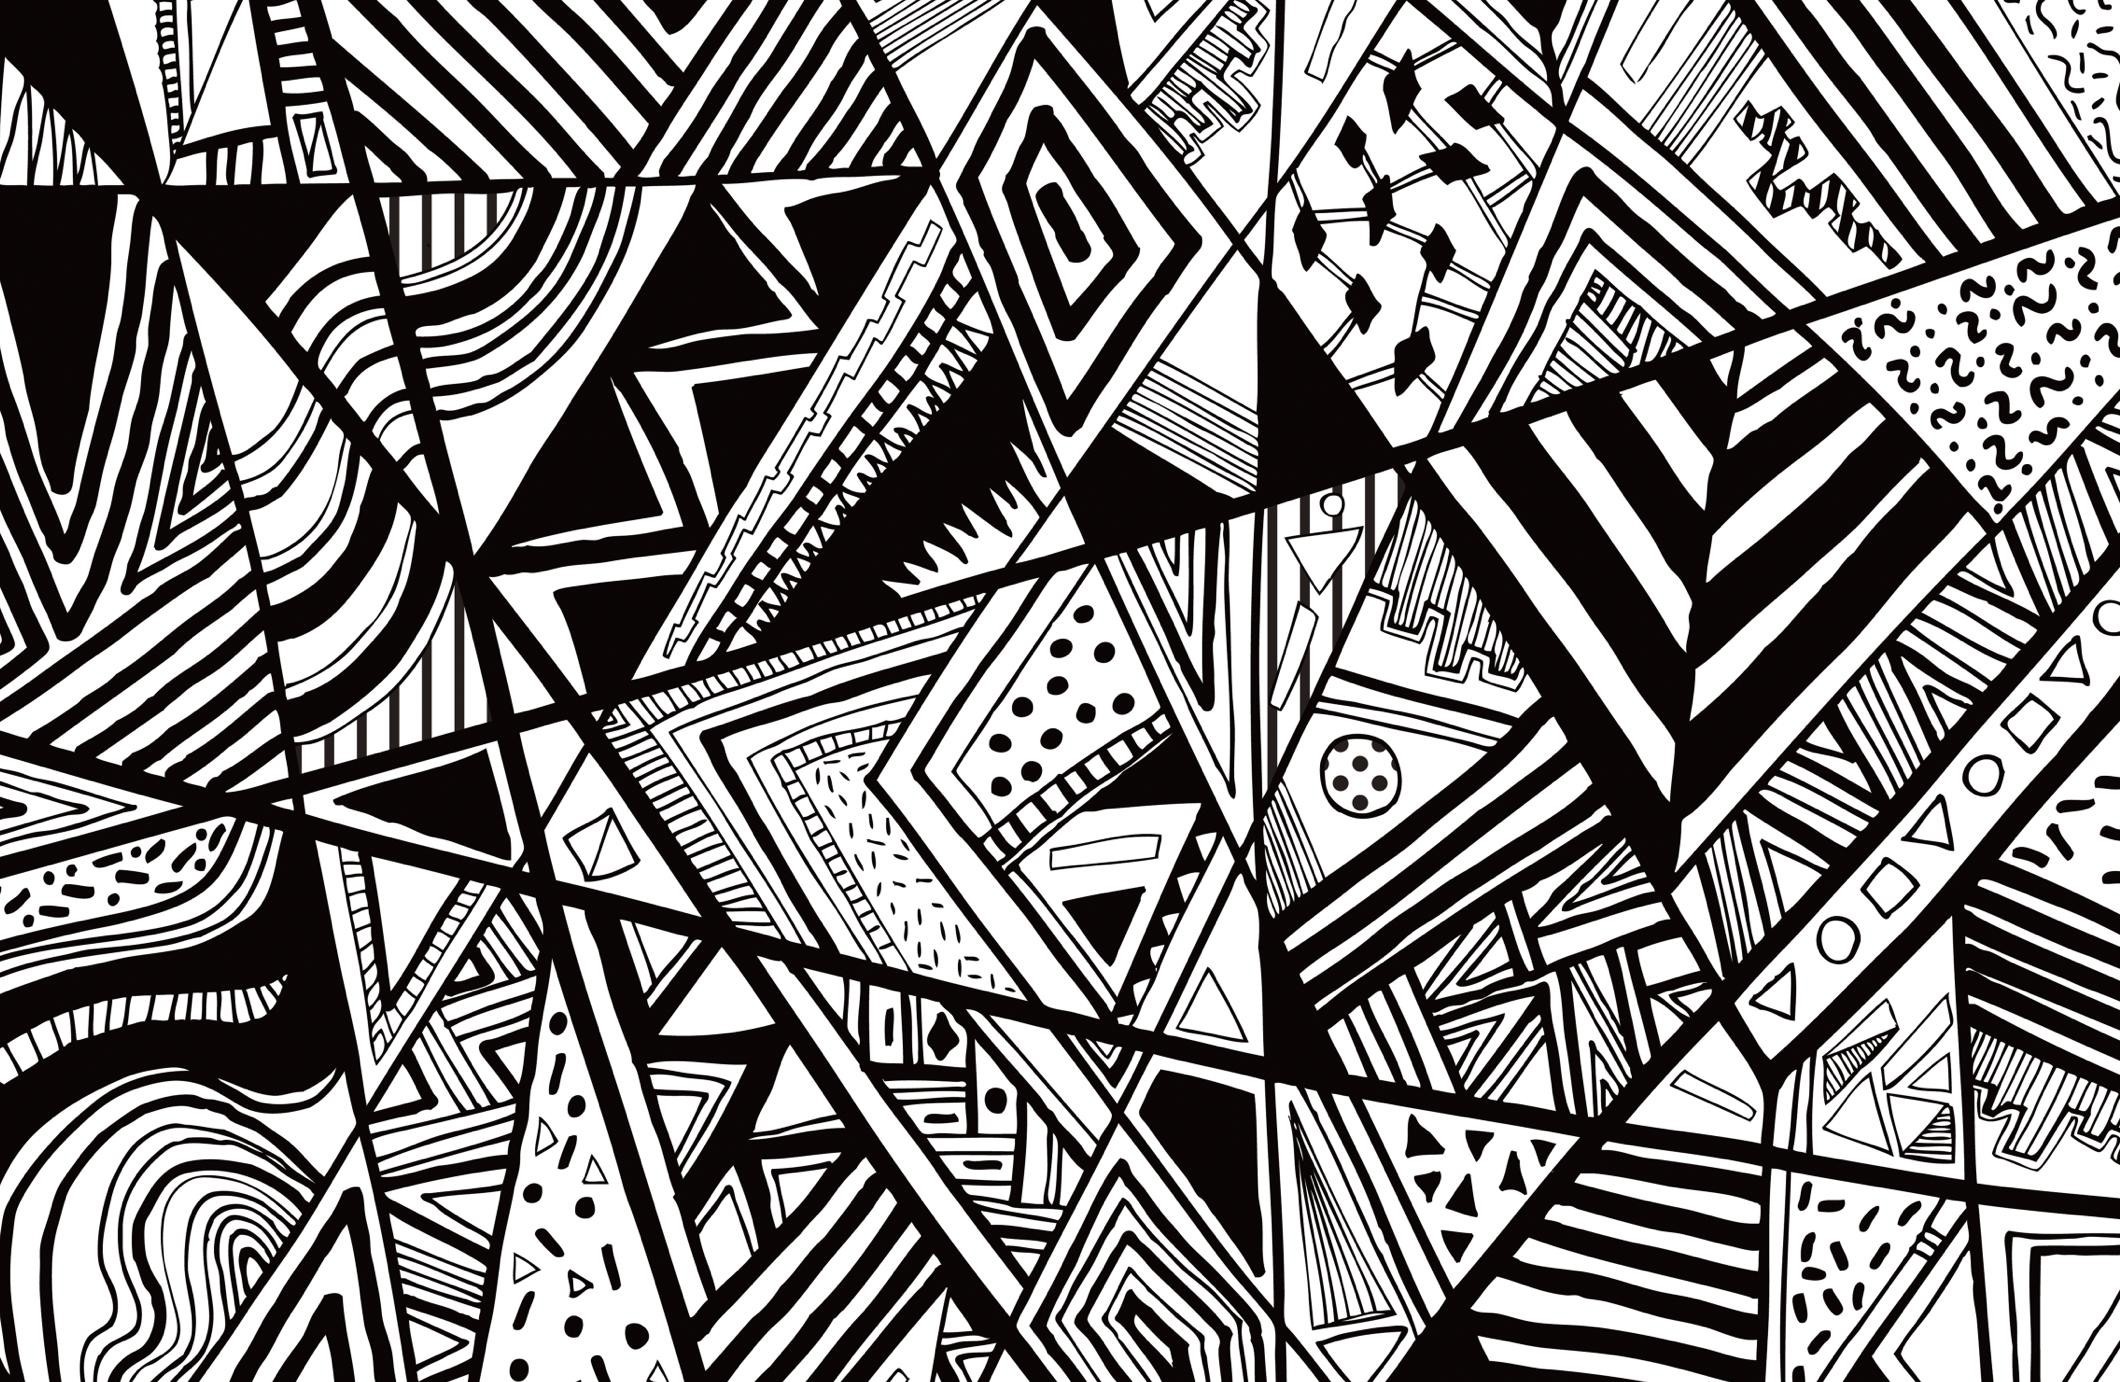 2120x1382  Free Fine Black And White Abstract Images.  0.58 MB